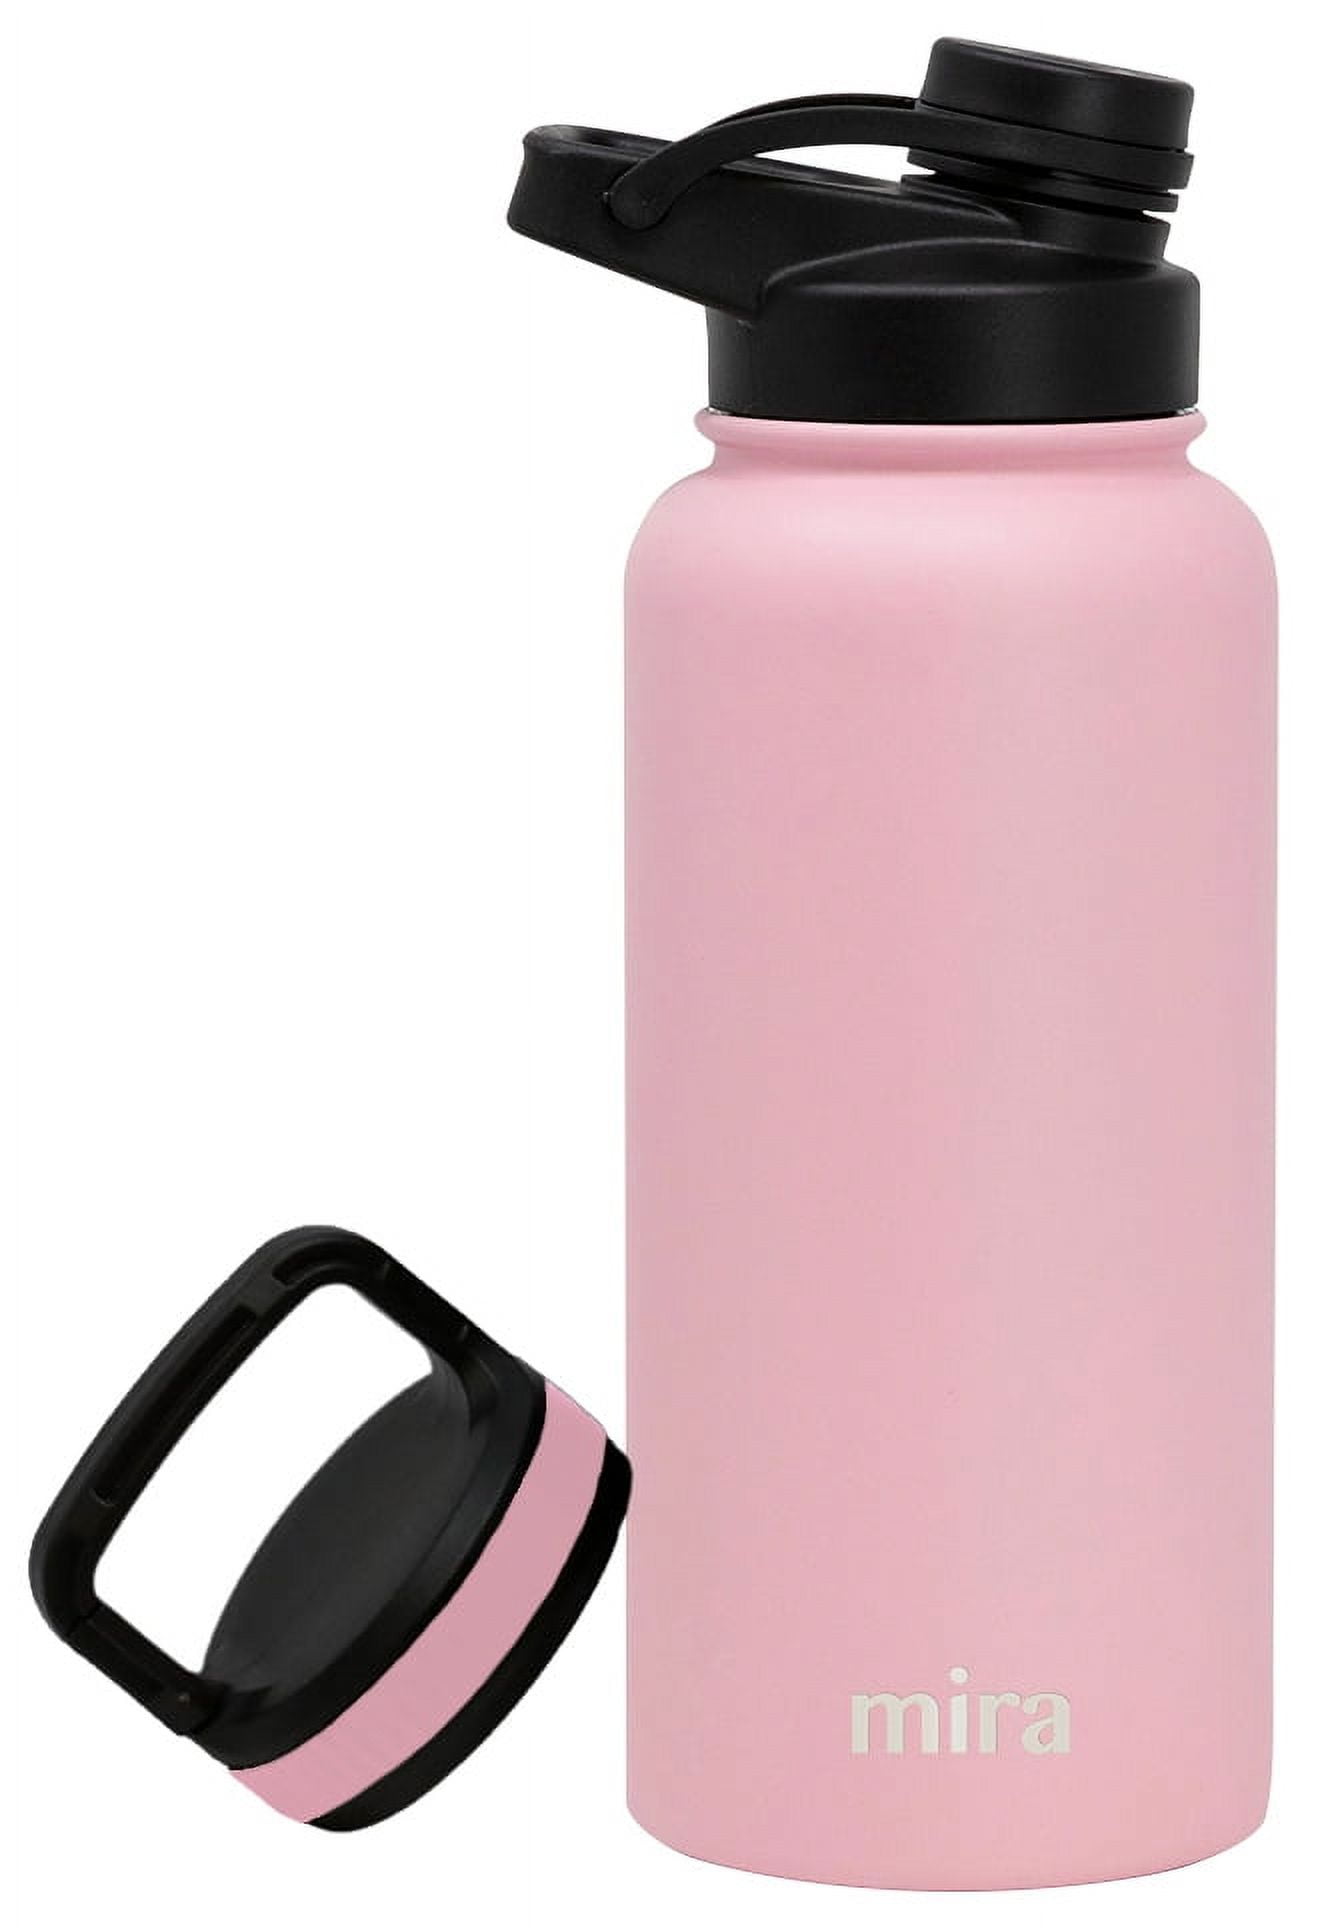 MIRA 32 oz Stainless Steel Insulated Sports Water Bottle - 2 Caps - Hydro  Metal Thermos Flask Keeps Cold for 24 Hours, Hot for 12 Hours - BPA-Free  Spout Lid Cap - Taffy Pink 